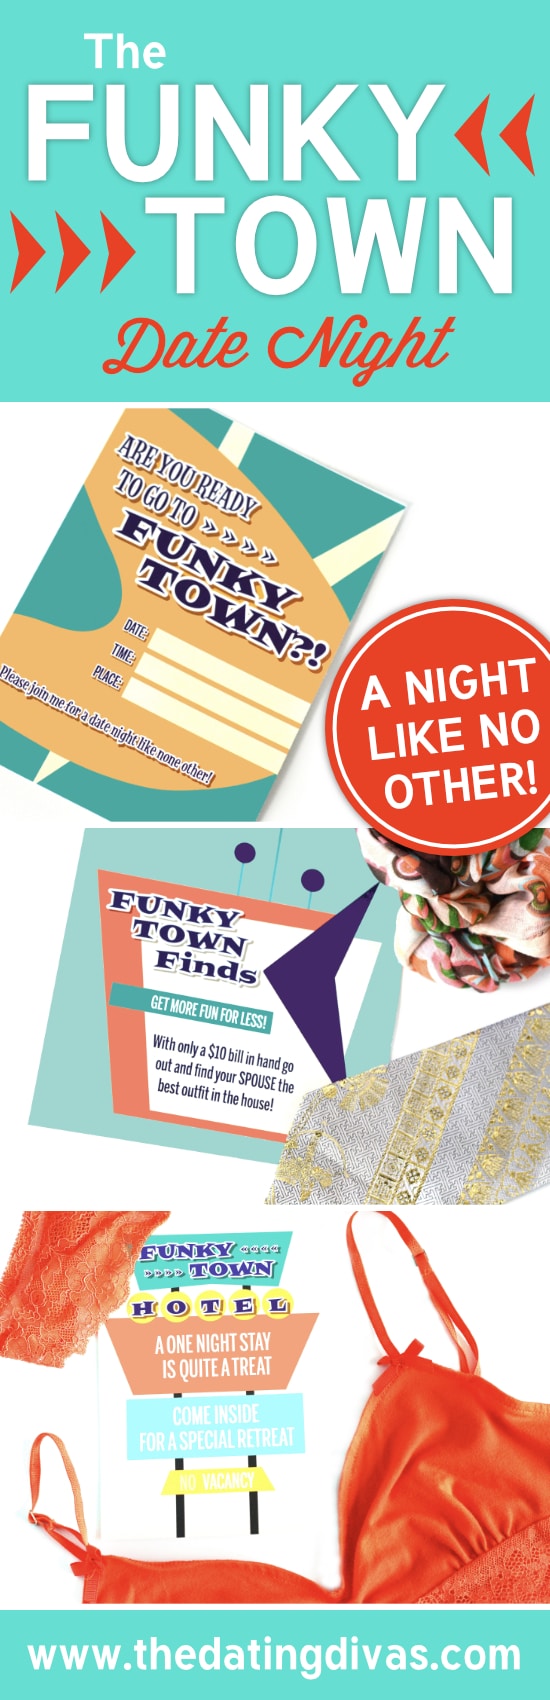 Funky Town will make date night a night like no other!